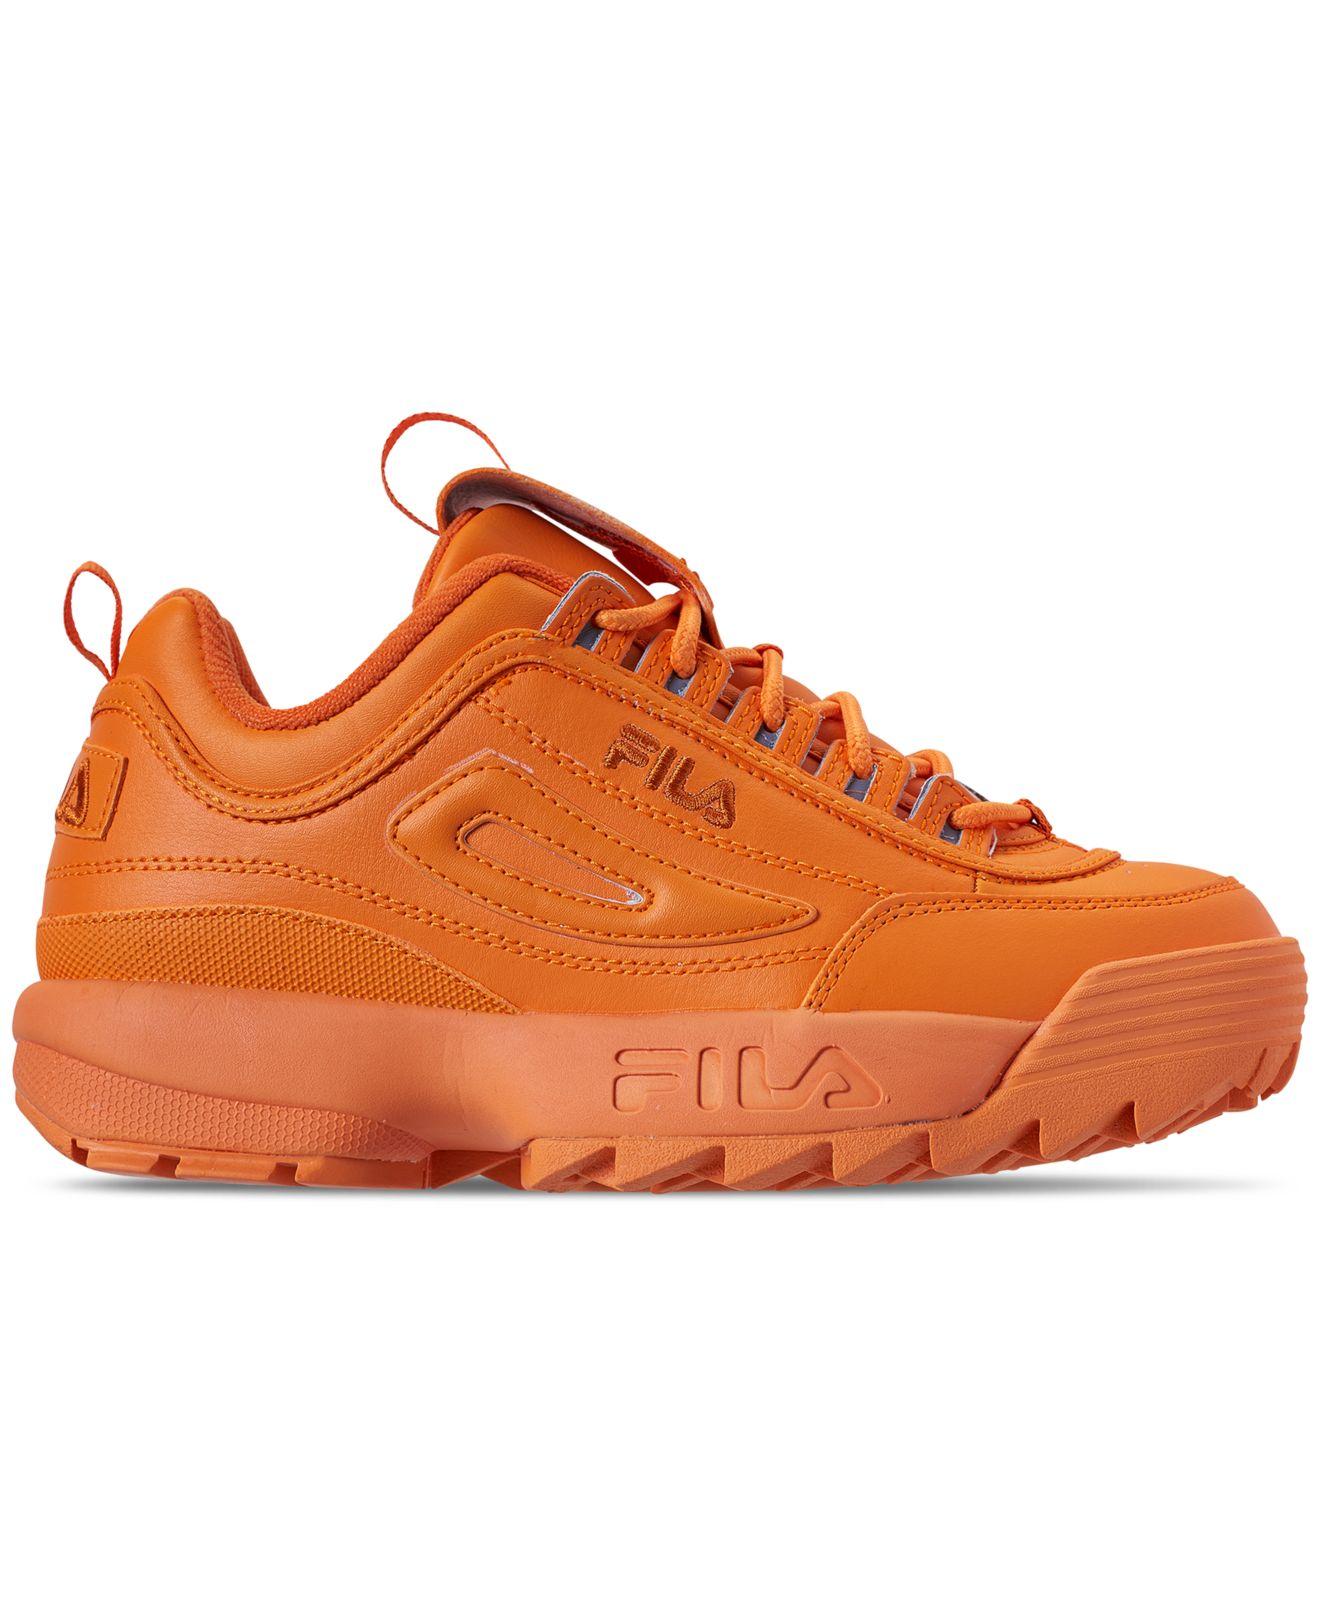 Fila Disruptor Ii Premium Casual Athletic Sneakers From Finish Line in ...